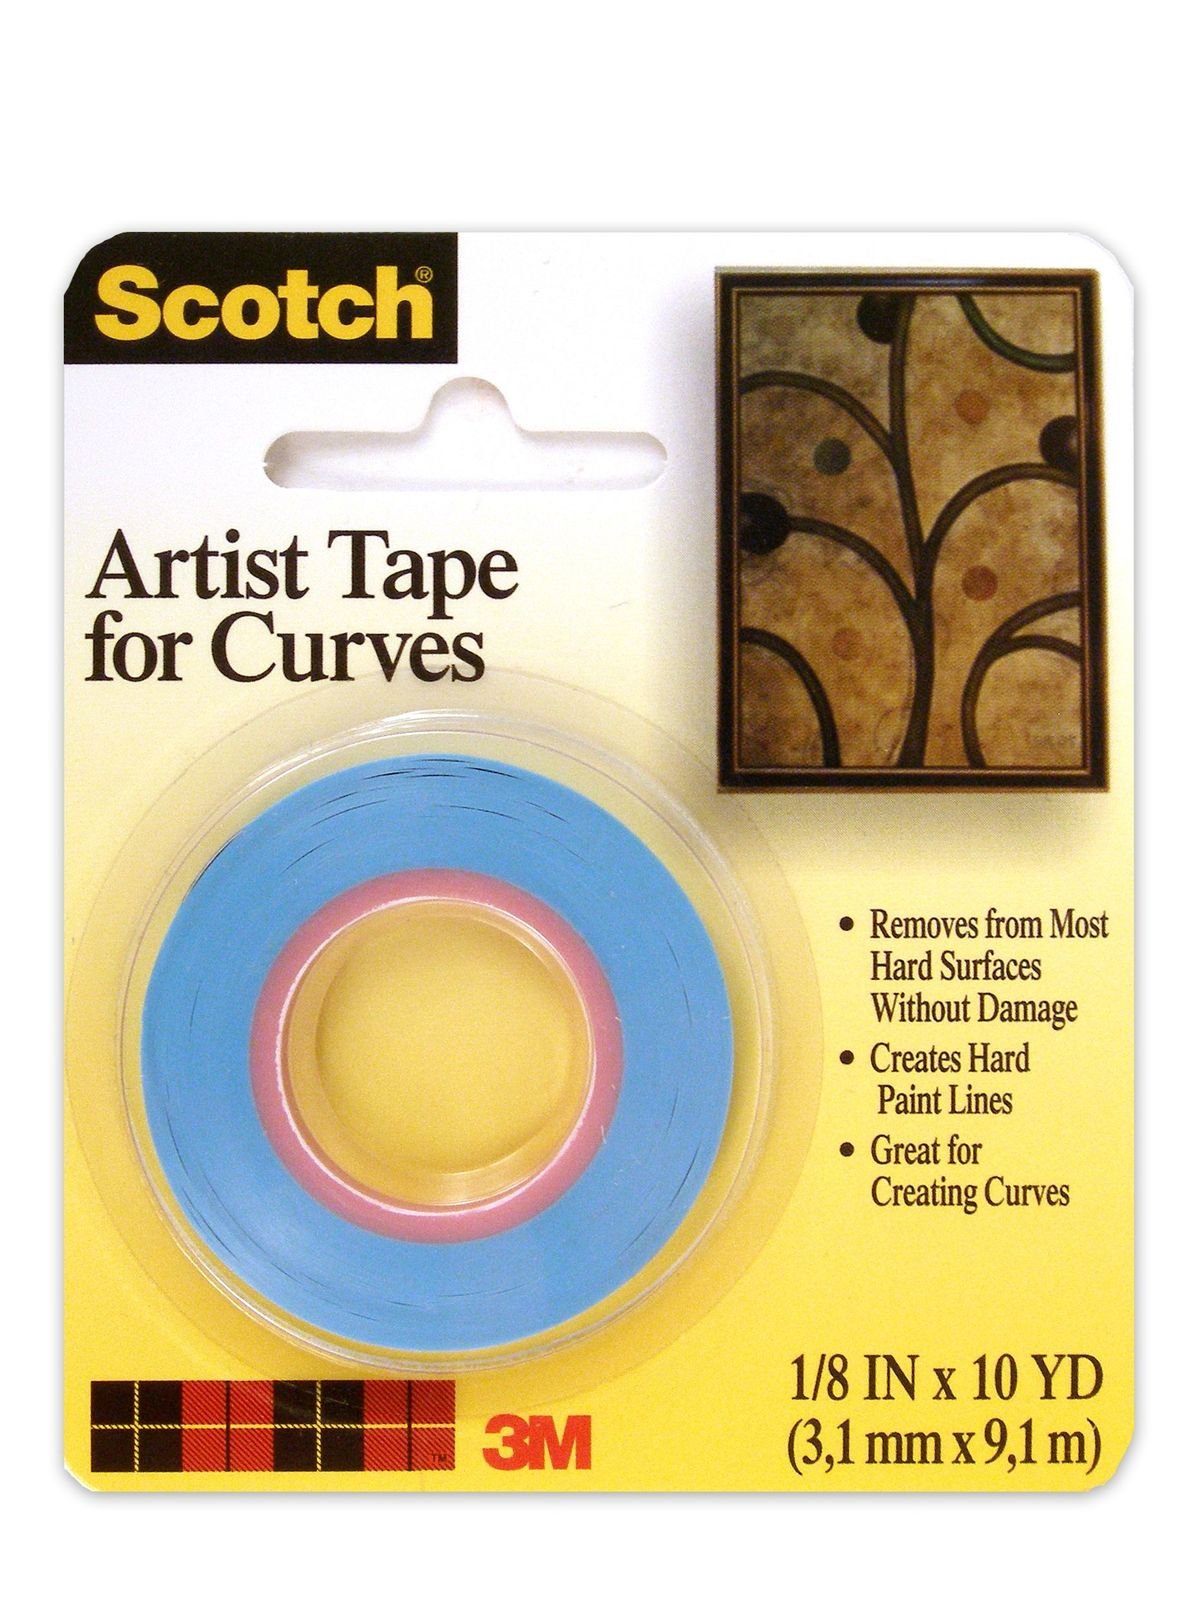 3M - Scotch Artist Tape for Curves